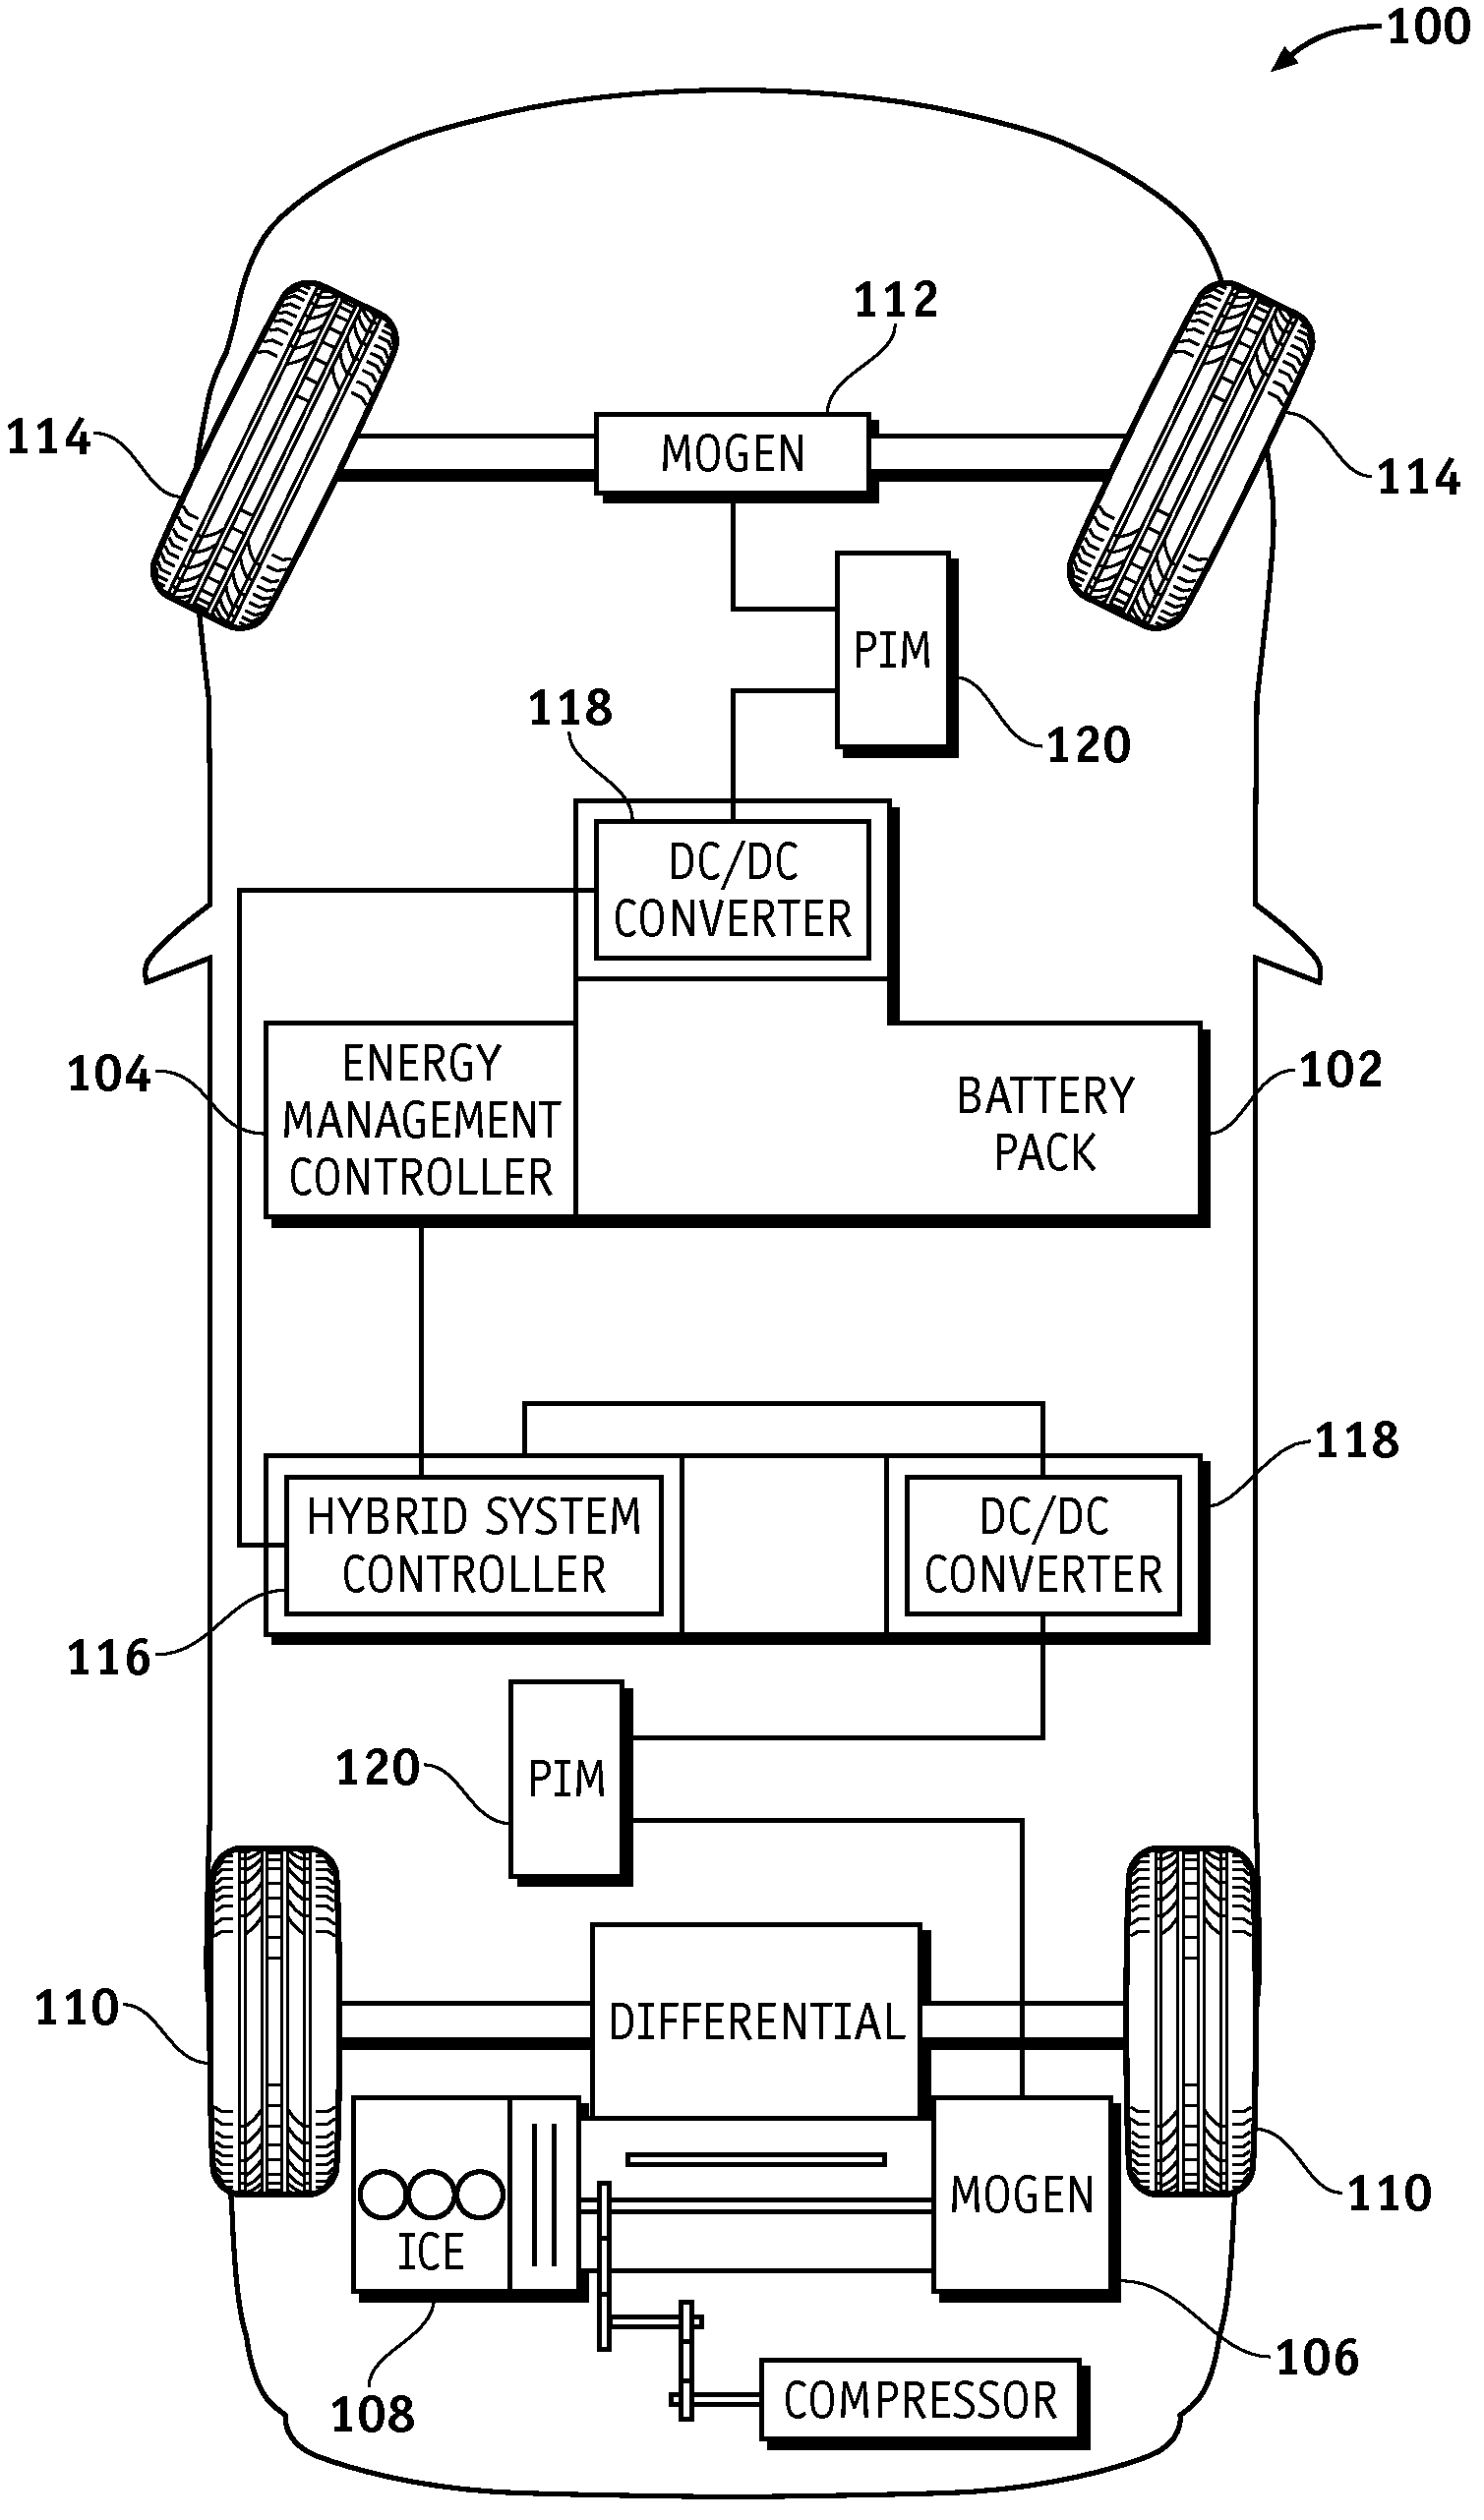 Dynamically adaptive method for determining the state of charge of a battery